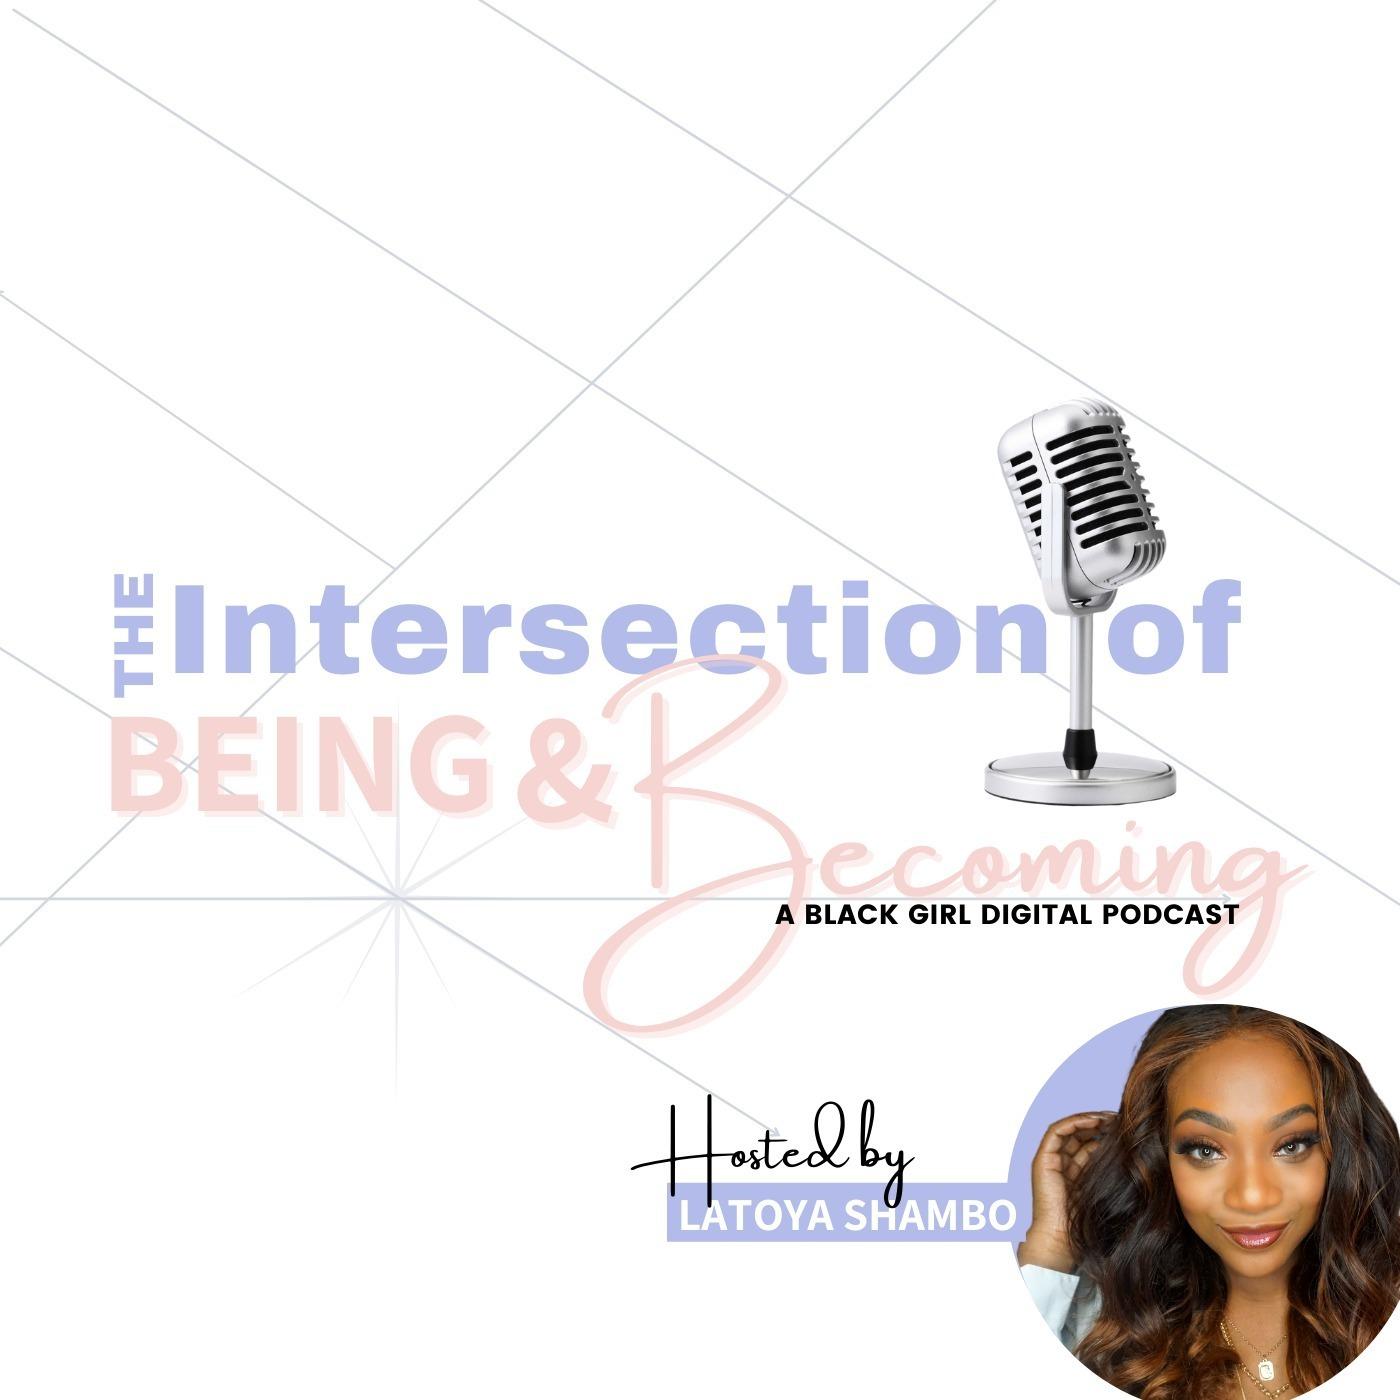 The Intersection of Being and Becoming, a Black Girl Digital Podcast